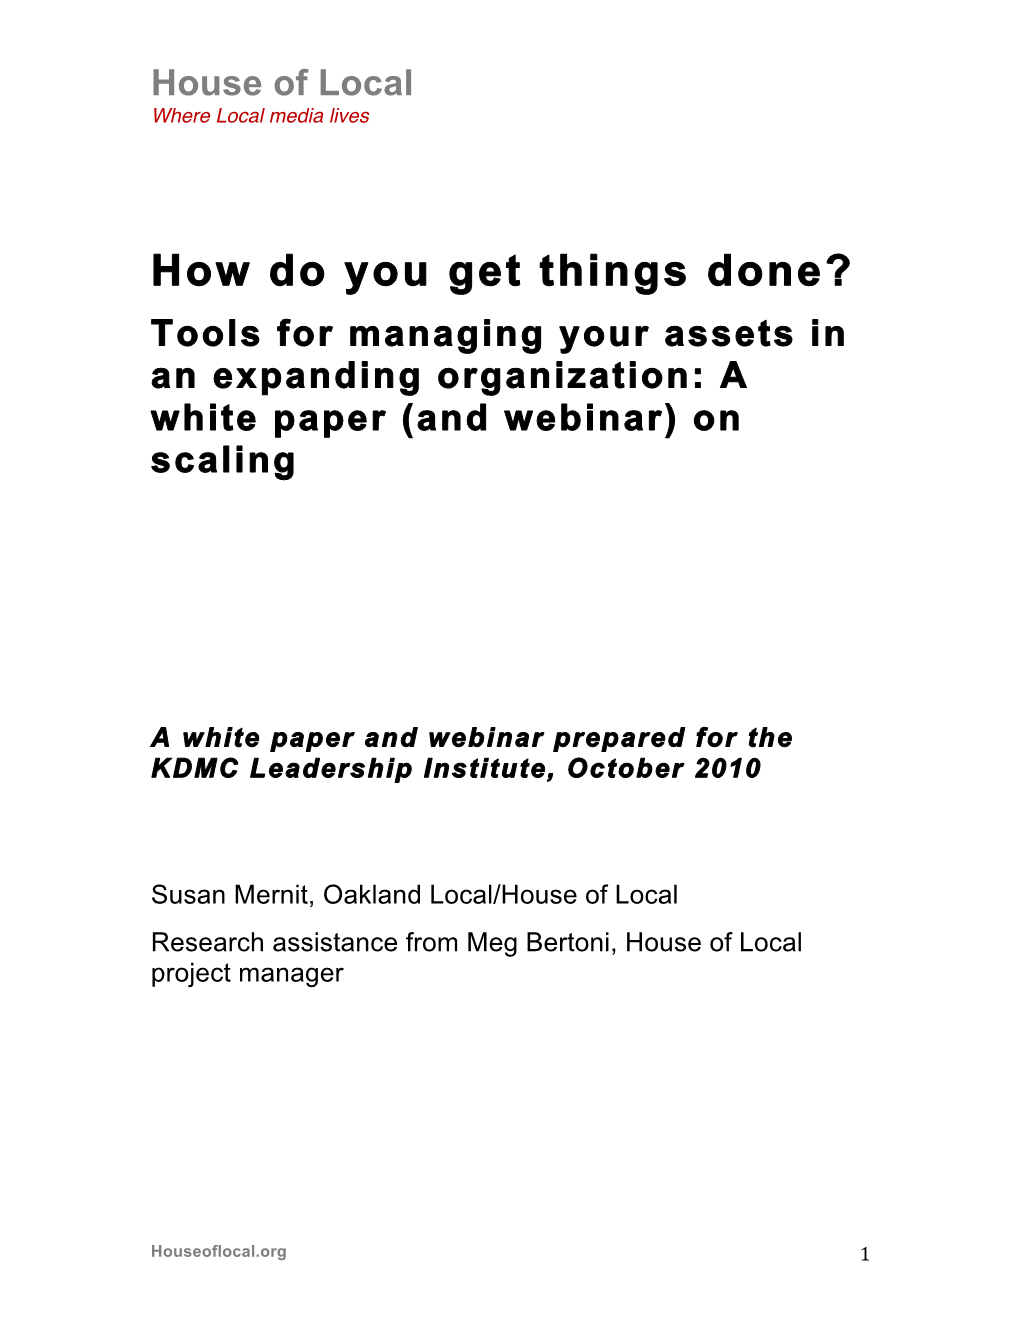 How Do You Get Things Done? Tools for Managing Your Assets in an Expanding Organization: a White Paper (And Webinar) on Scaling